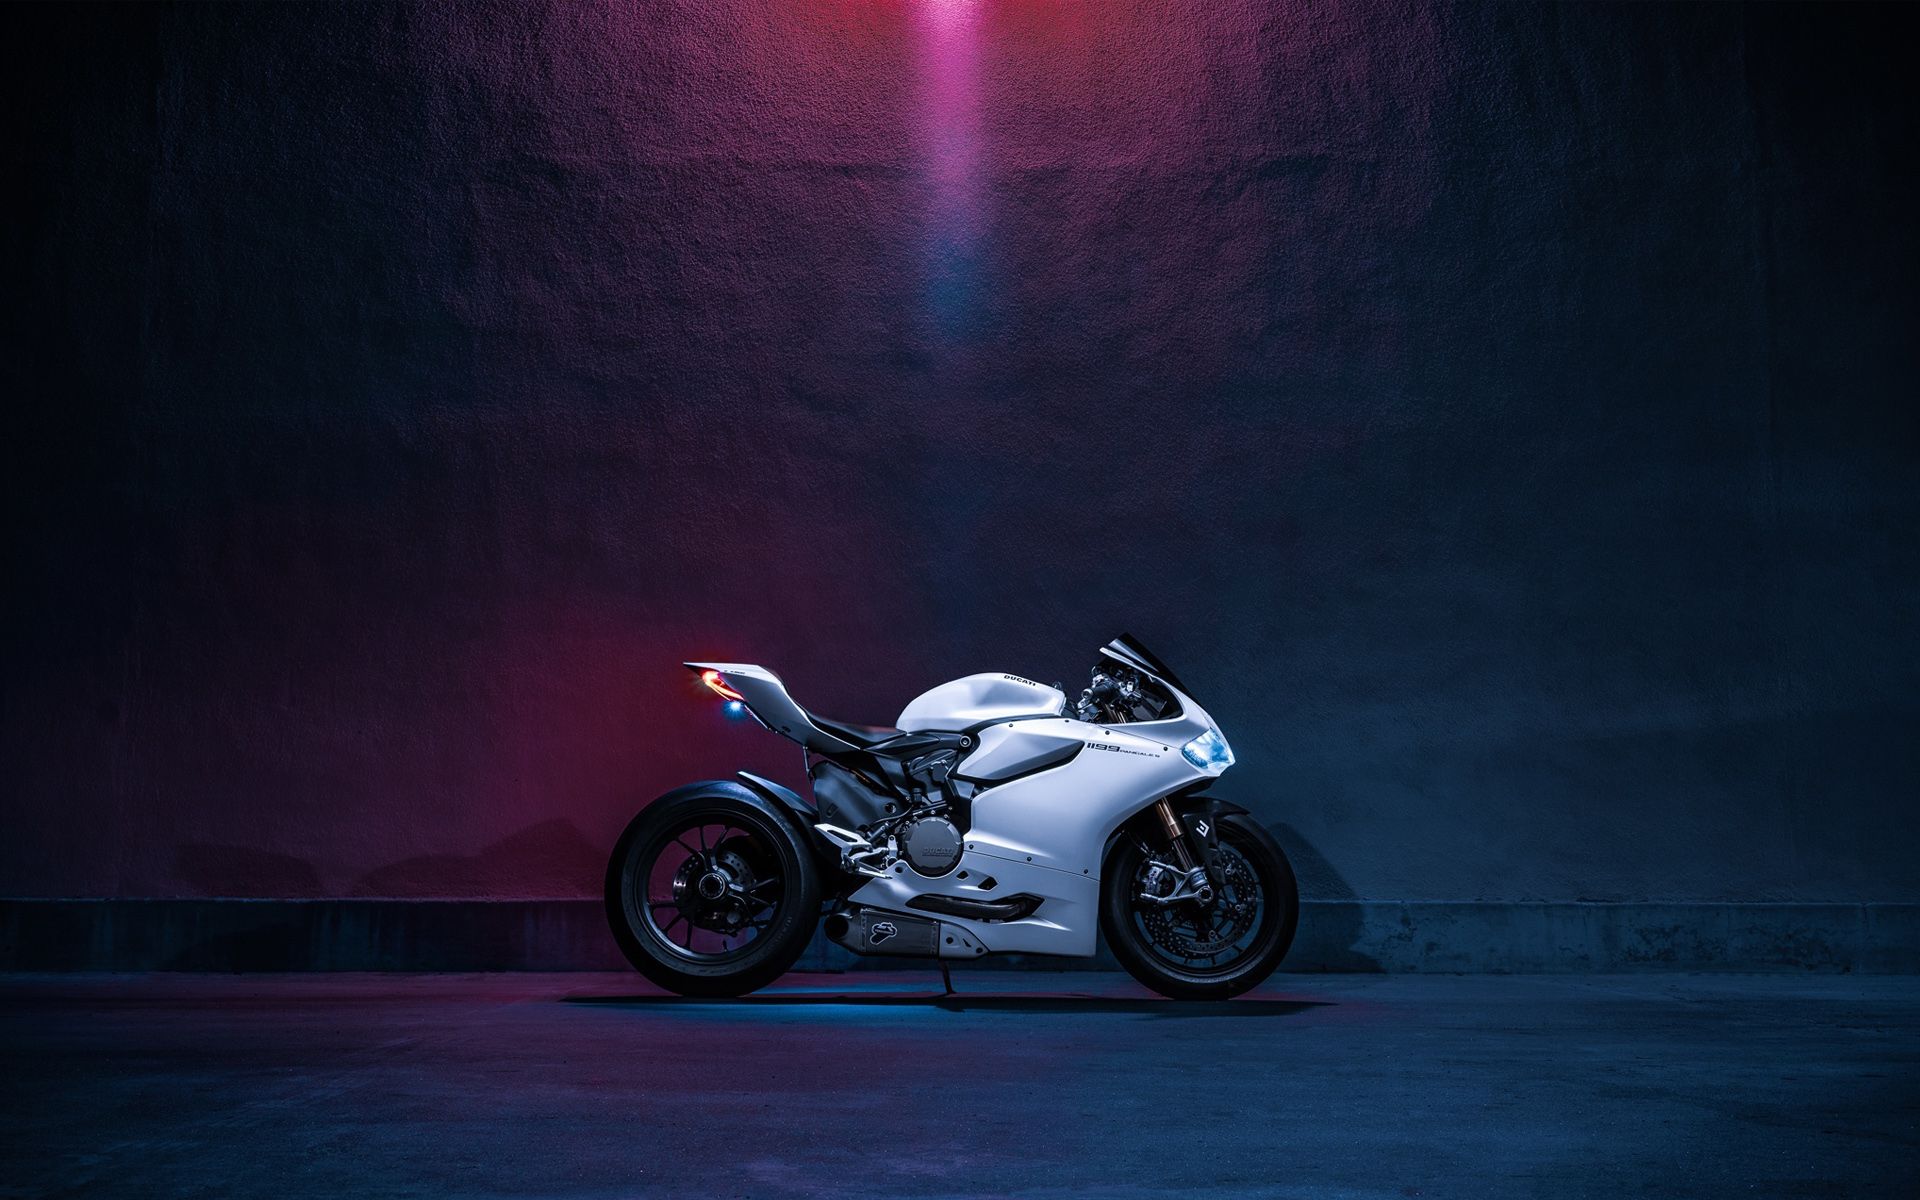 Ducati 1199 Panigale S Bike Wallpapers HD Backgrounds